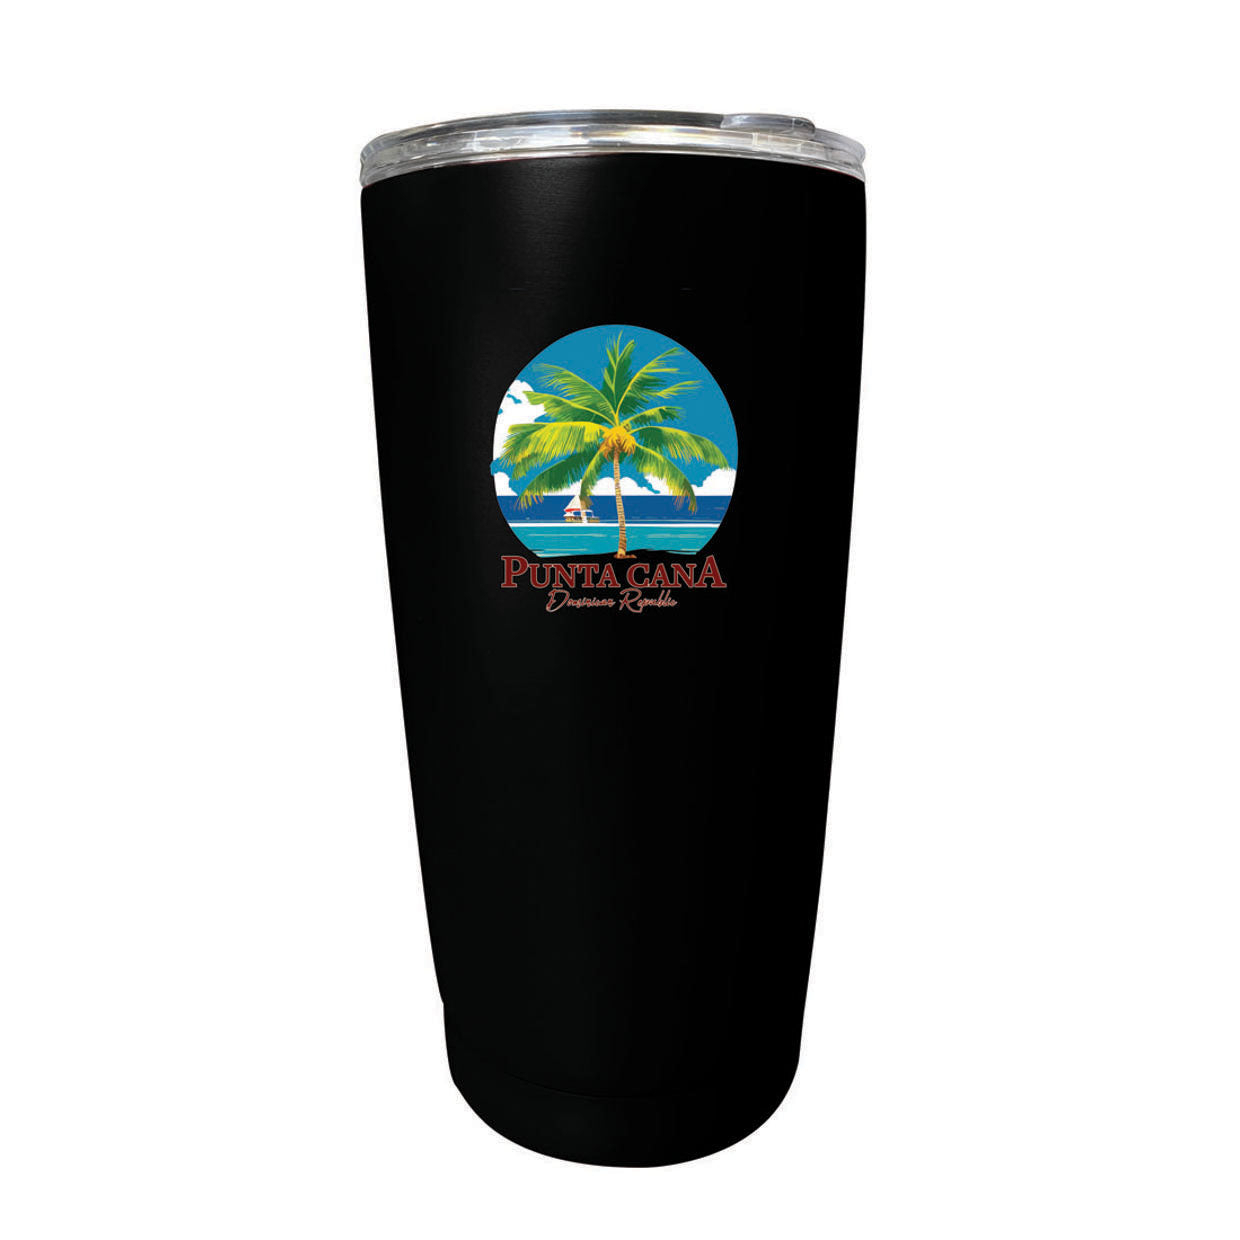 Punta Cana Dominican Republic Souvenir 16 Oz Stainless Steel Insulated Tumbler - Black, PARROT B